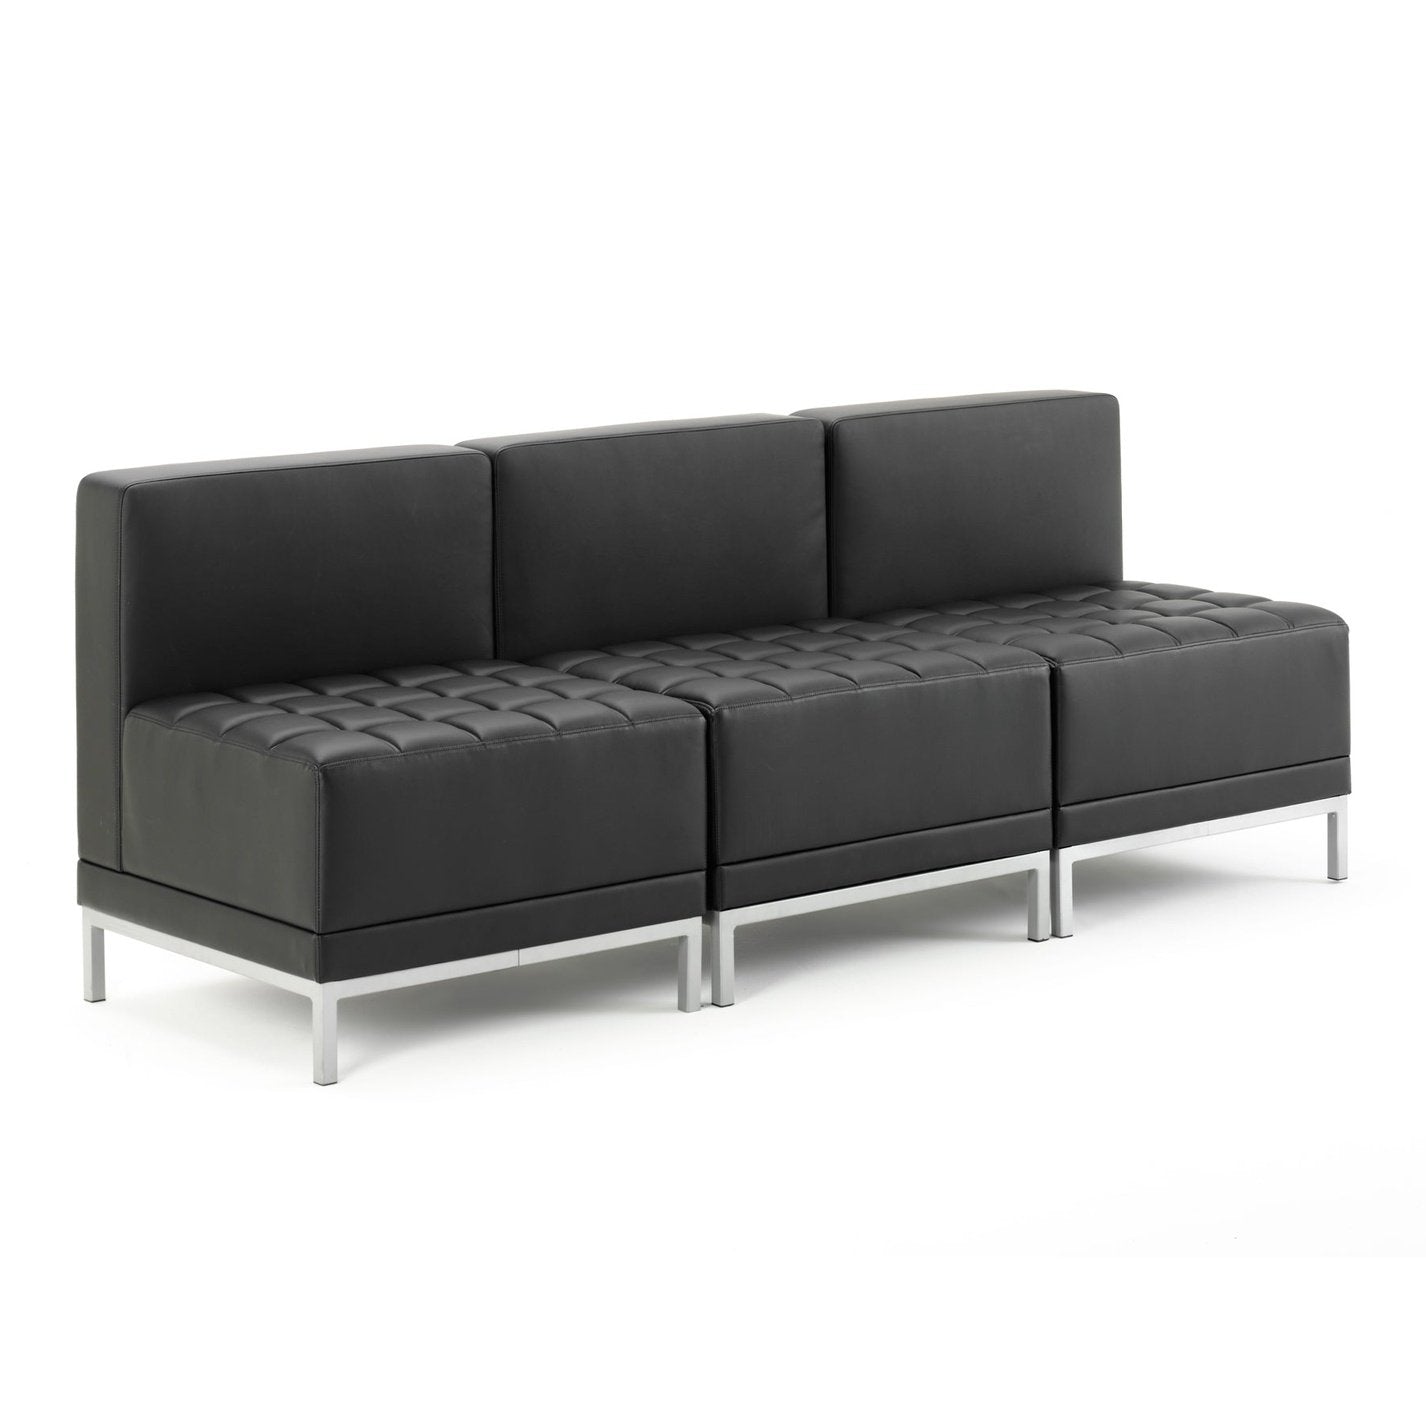 Infinity Modular Straight Back Sofa Chair - Soft Bonded Leather, Chrome Metal Frame, Pre-Assembled, 150kg Capacity, 5hr Usage - 660x660x770mm